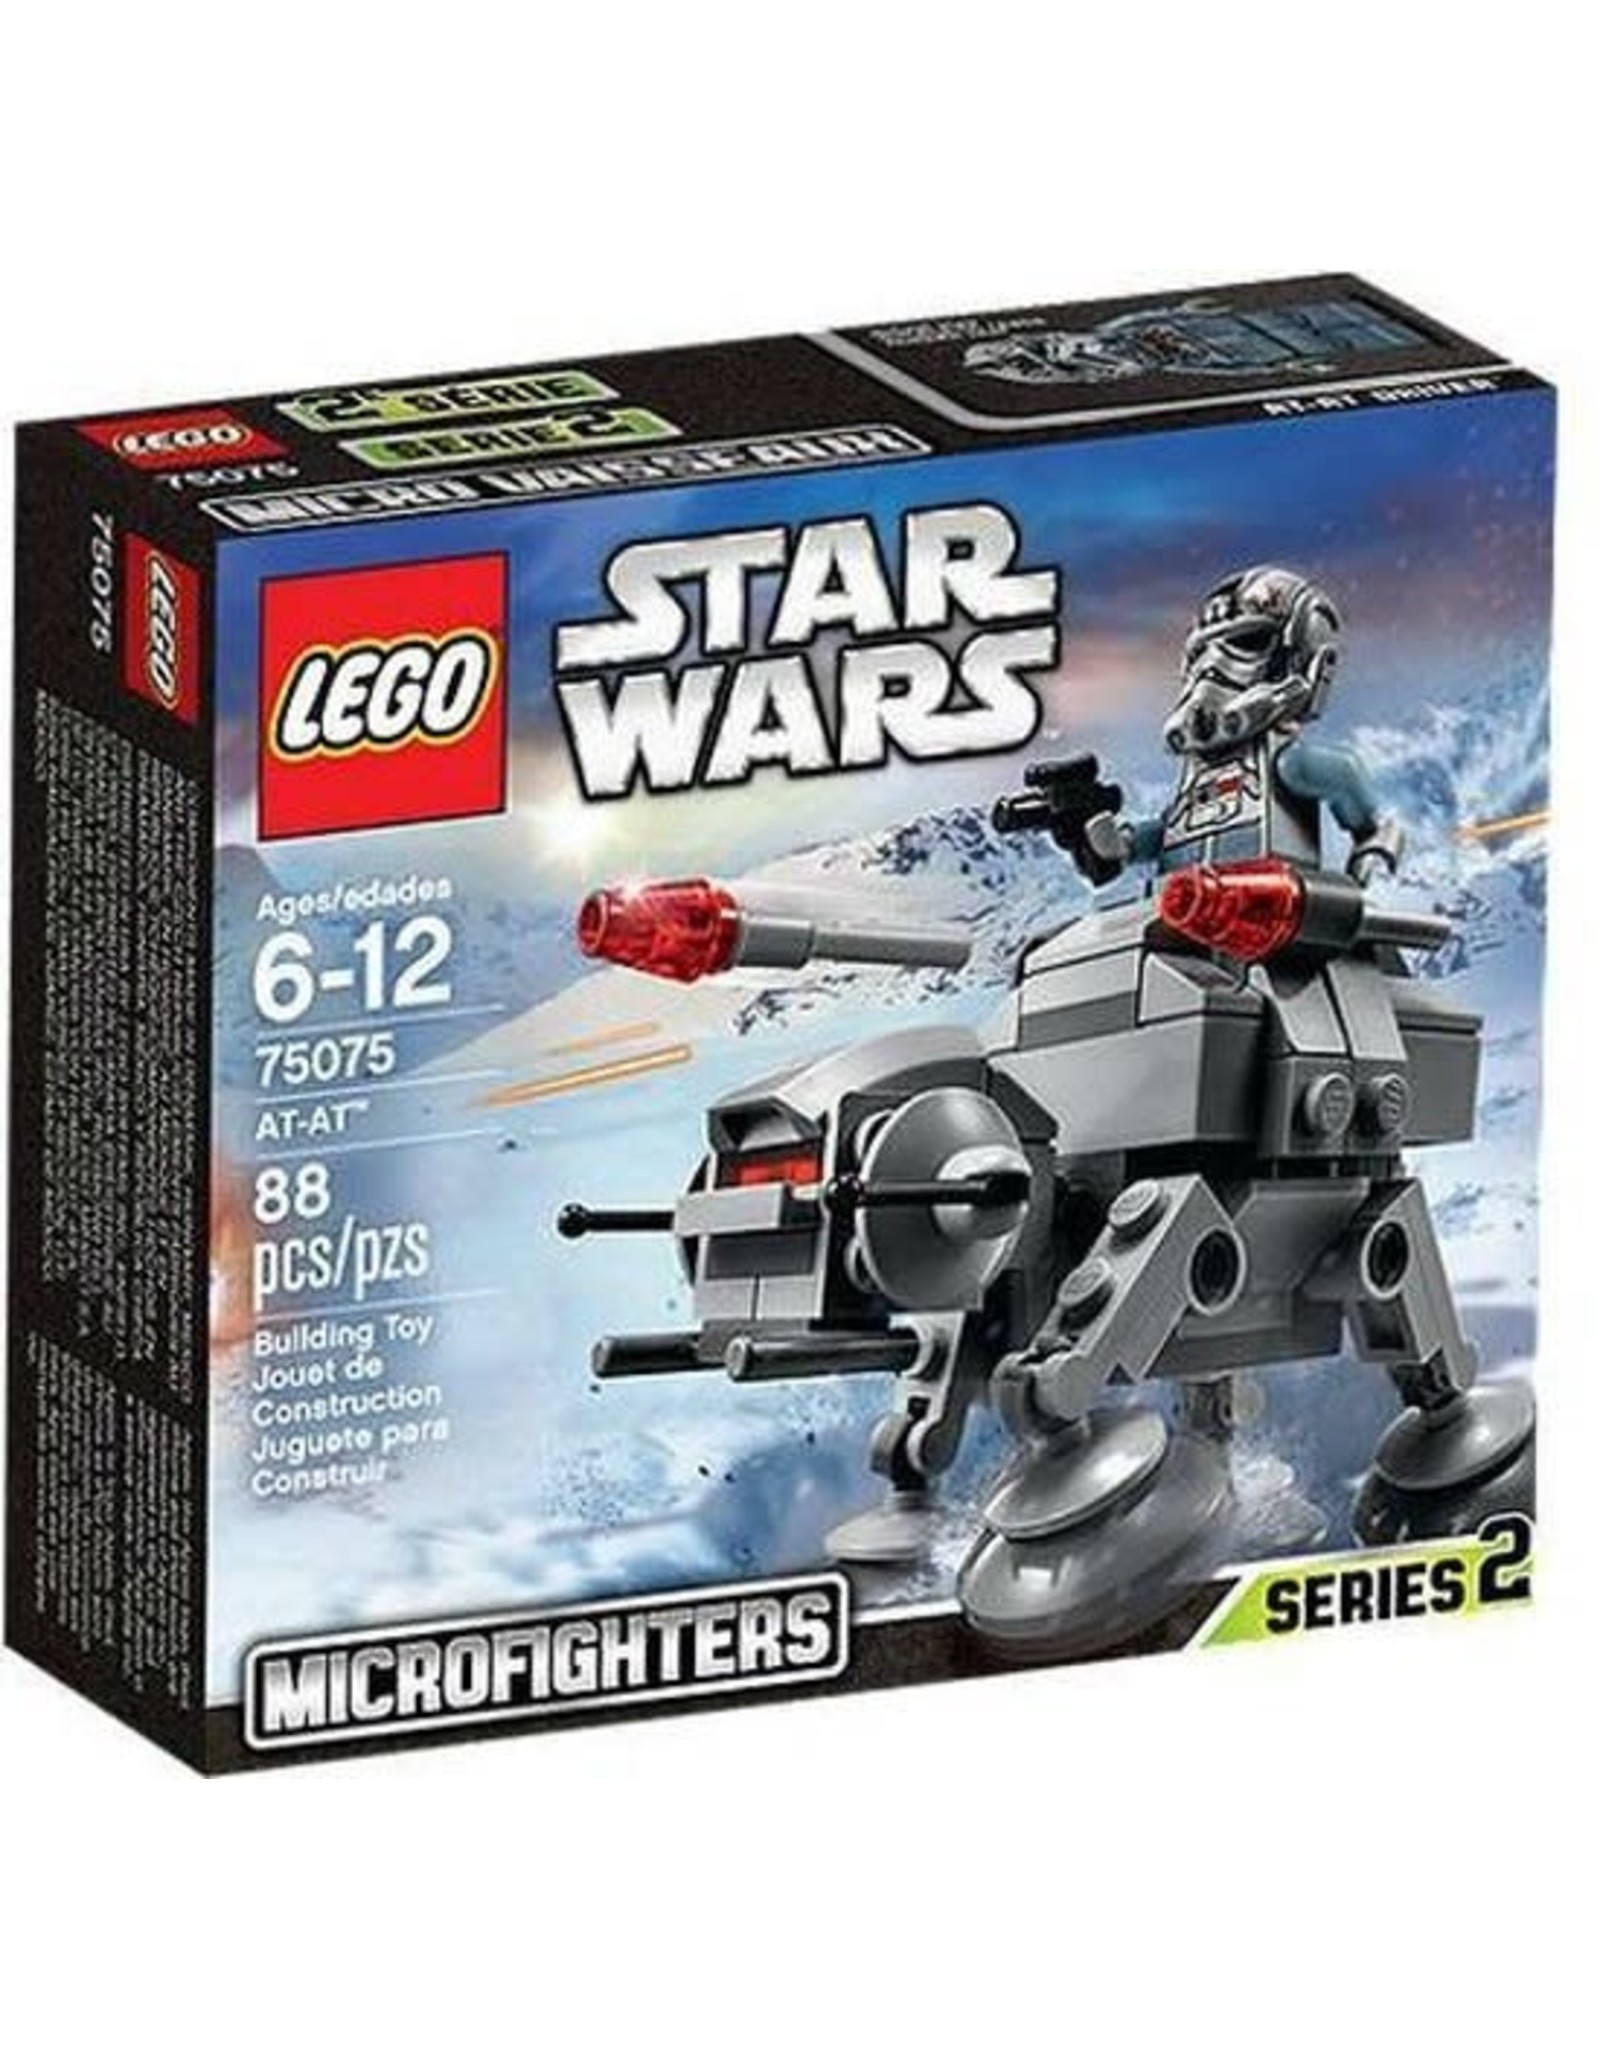 LEGO Lego Star Wars 75075 AT-AT™ Microfighter